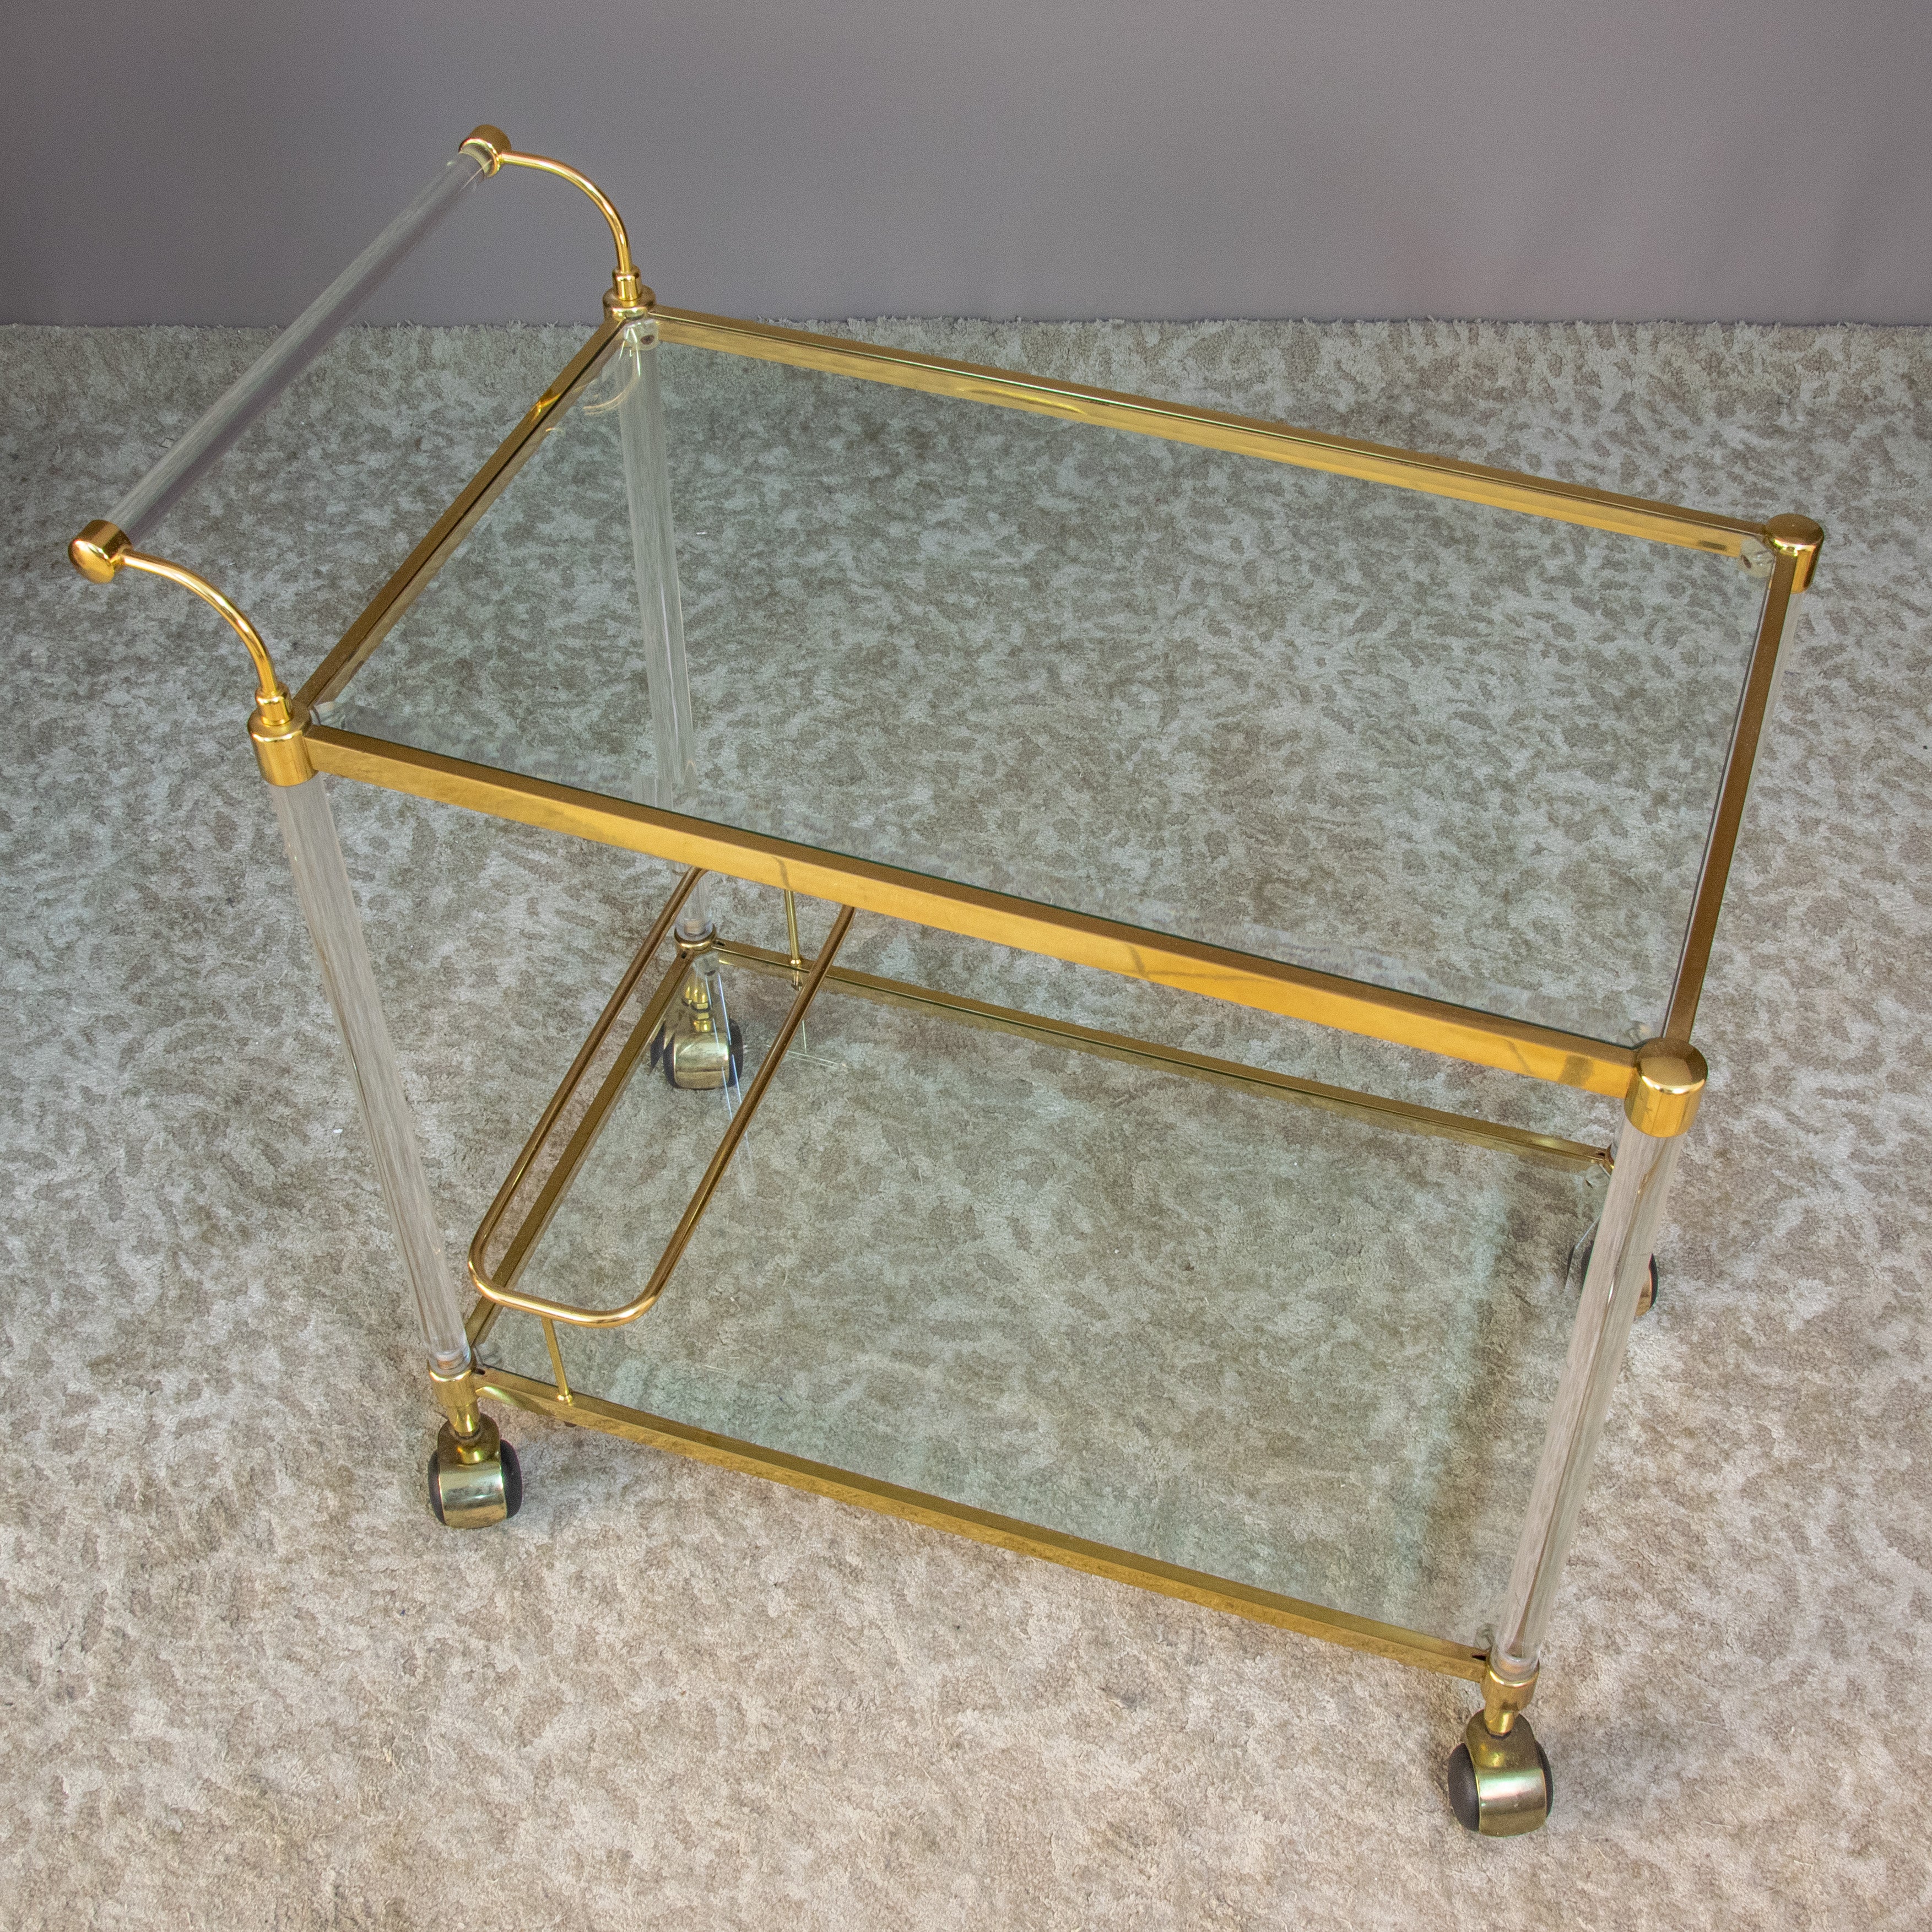 Golden brass and lucite trolley from the 1950s. 
The trolley has two glass shelves finished in brass. 
The shelf edges are in elegant golden brass. 
The four rubber wheels are original and work well so the trolley can easily be moved around by the